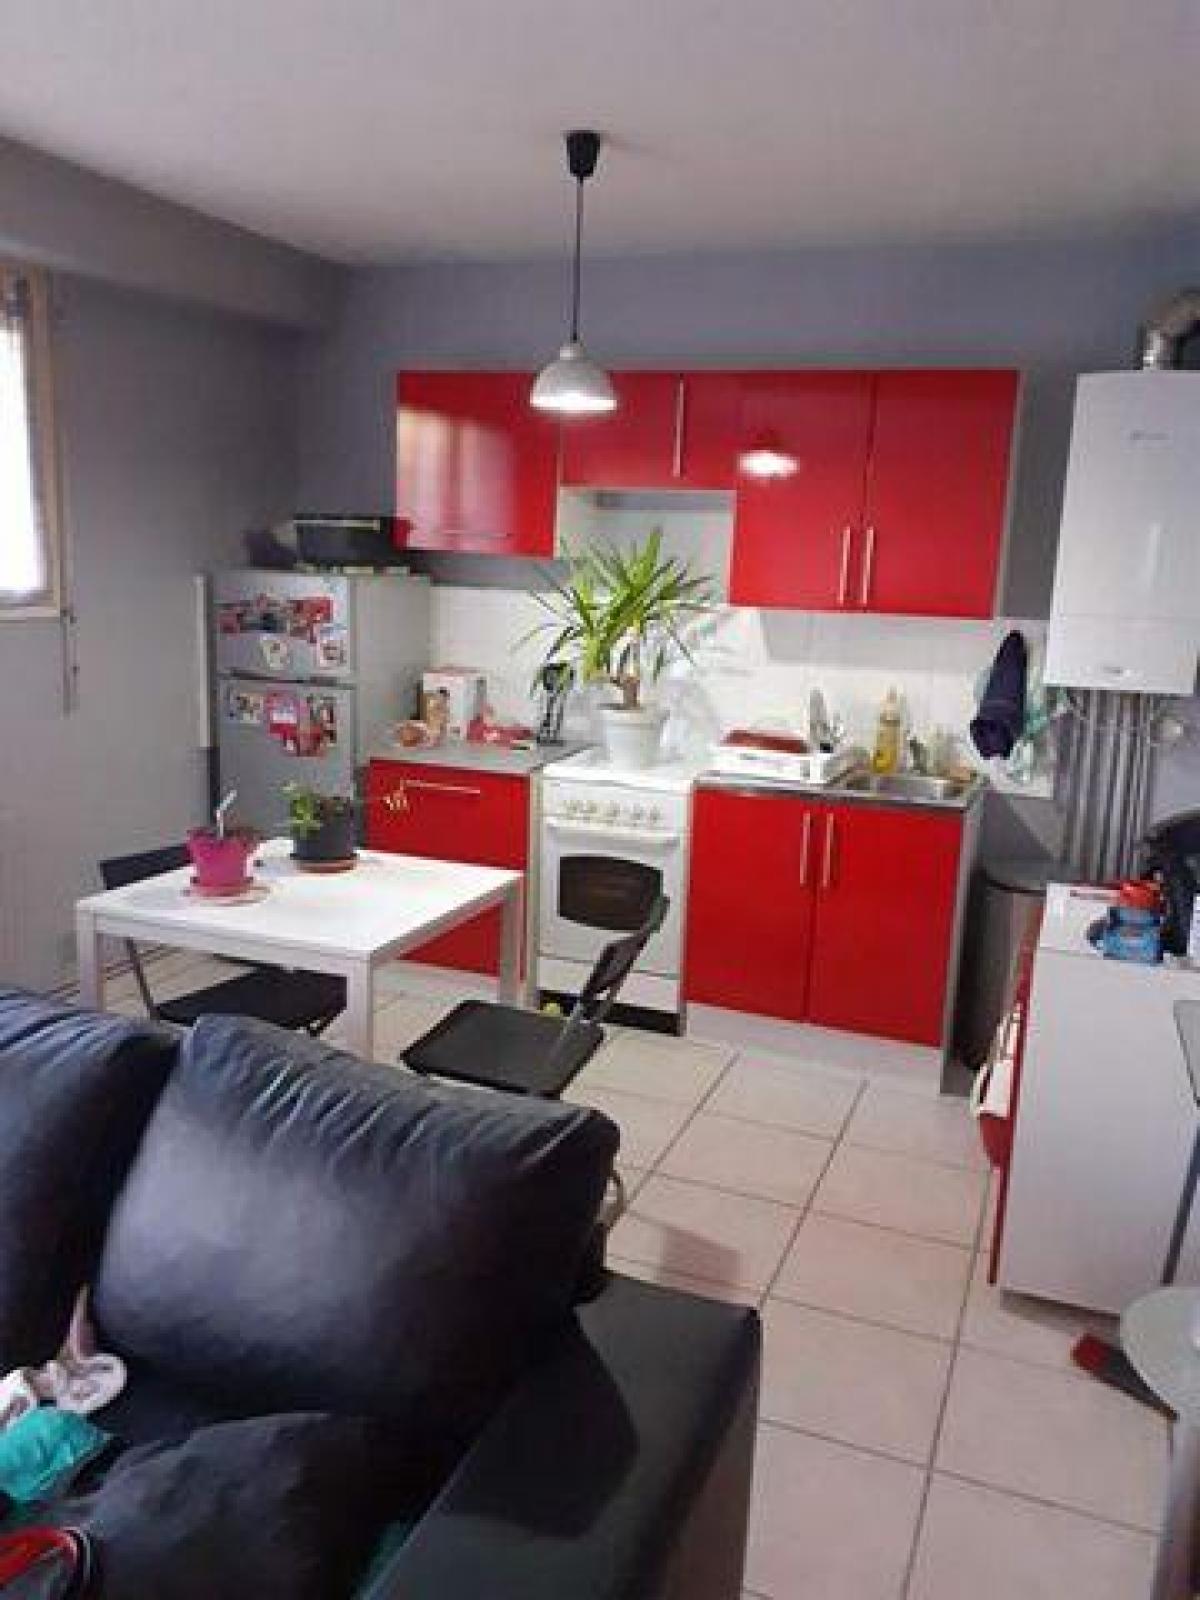 Picture of Apartment For Sale in Chatellerault, Poitou Charentes, France